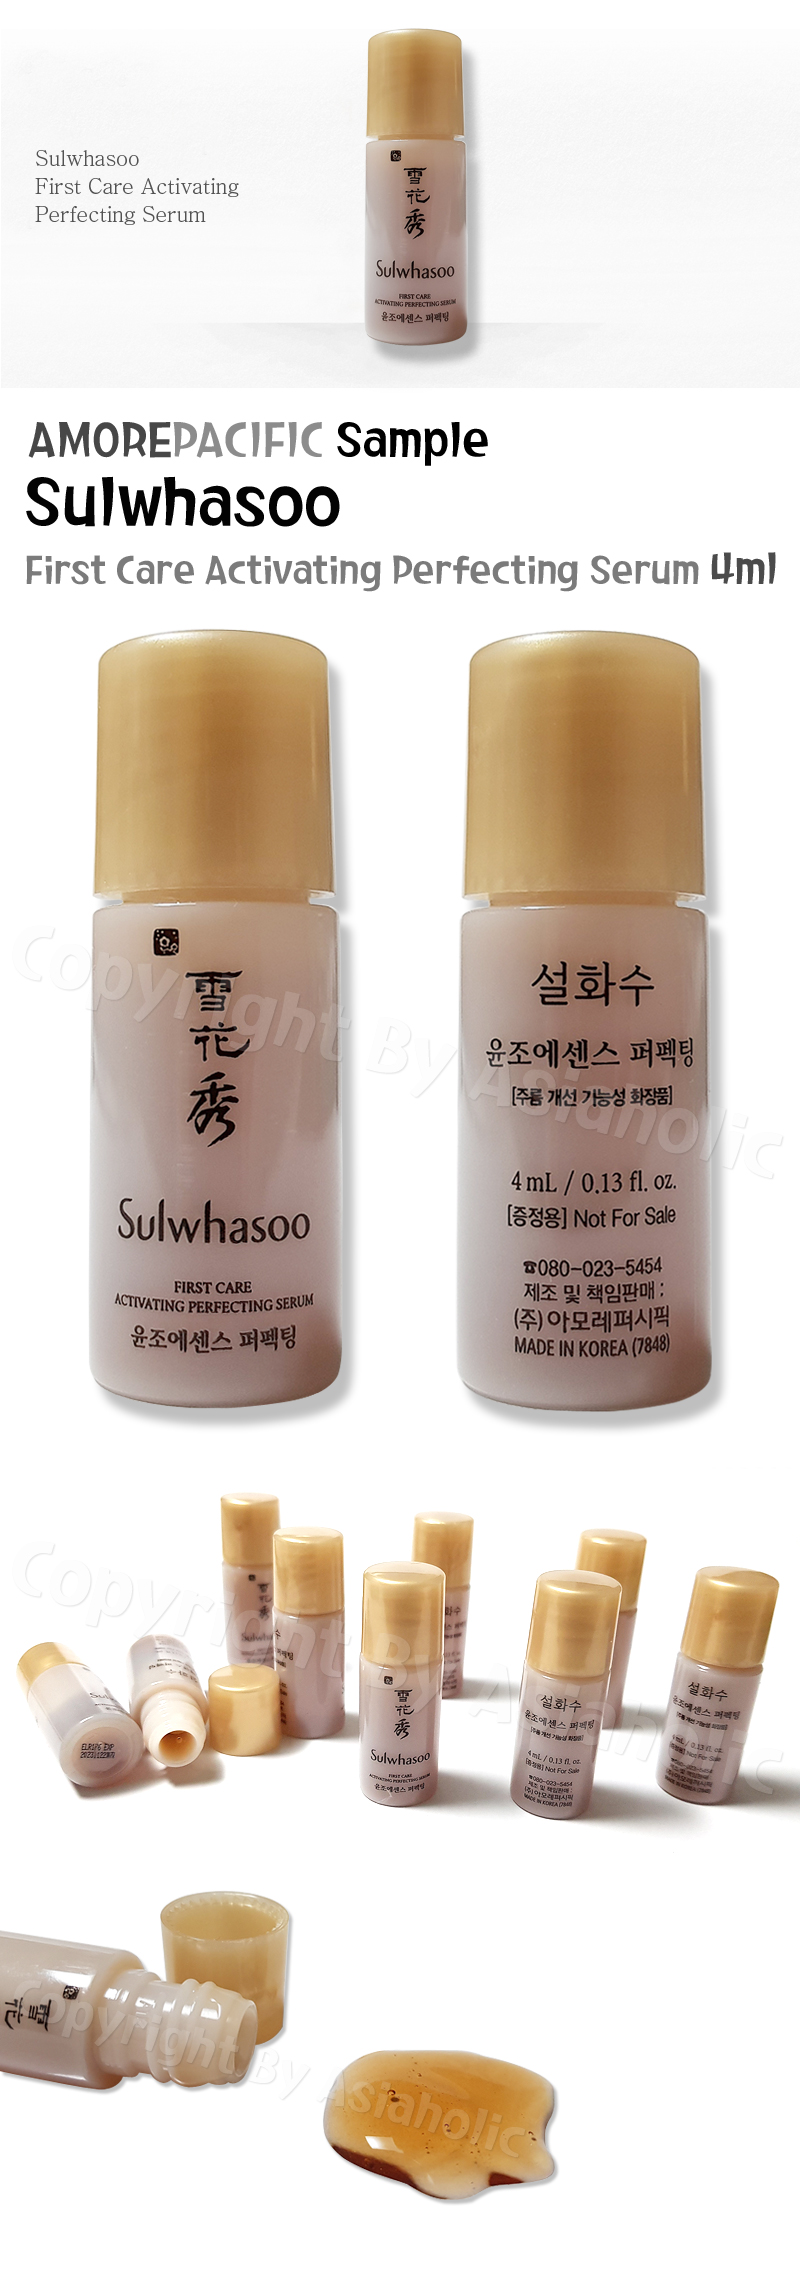 Sulwhasoo First Care Activating Perfecting Serum 4ml x 50pcs (200ml) Sample Newest Version